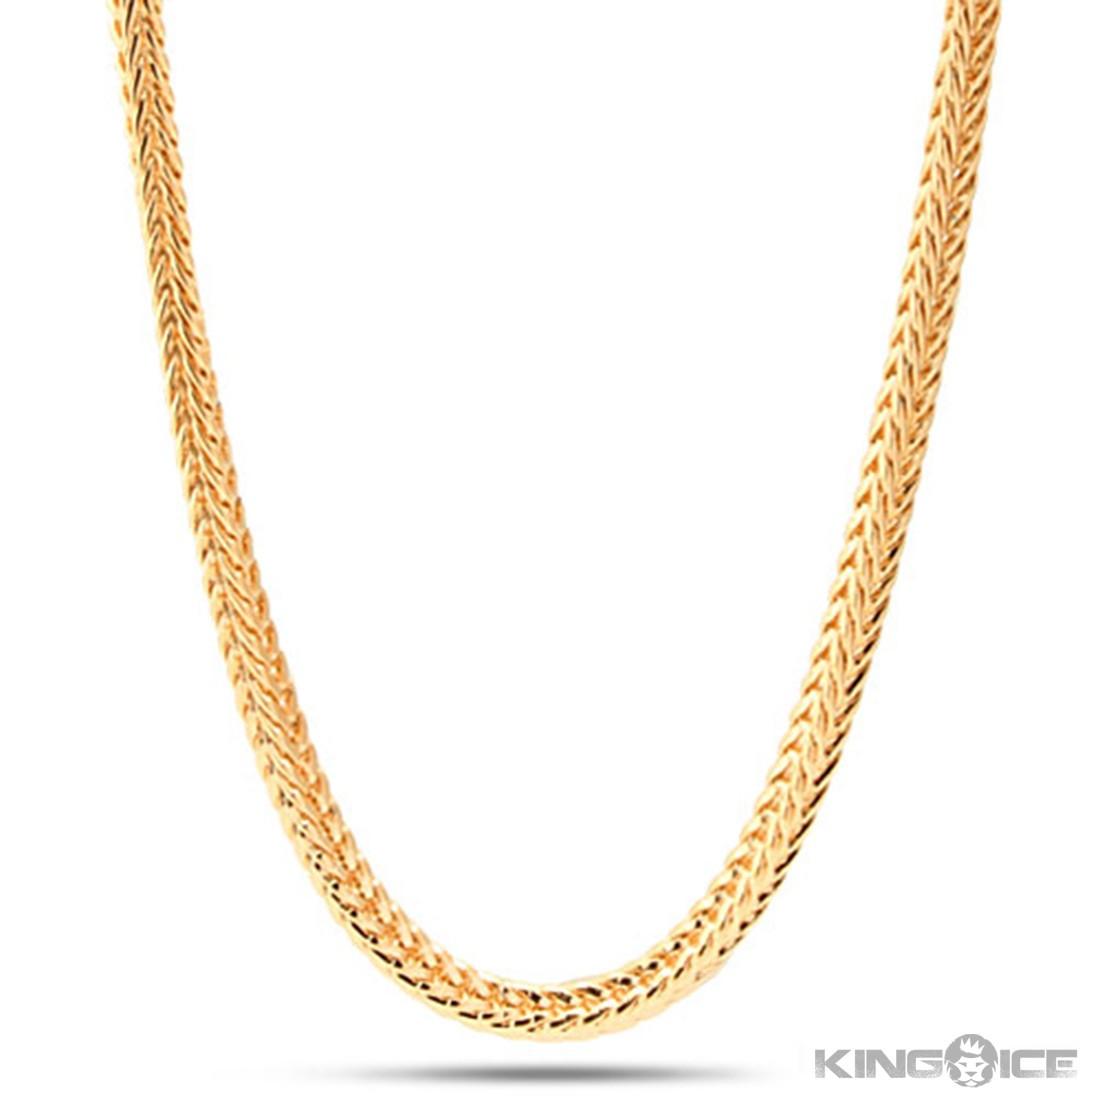 Chain HD PNG Transparent Chain HD PNG Image